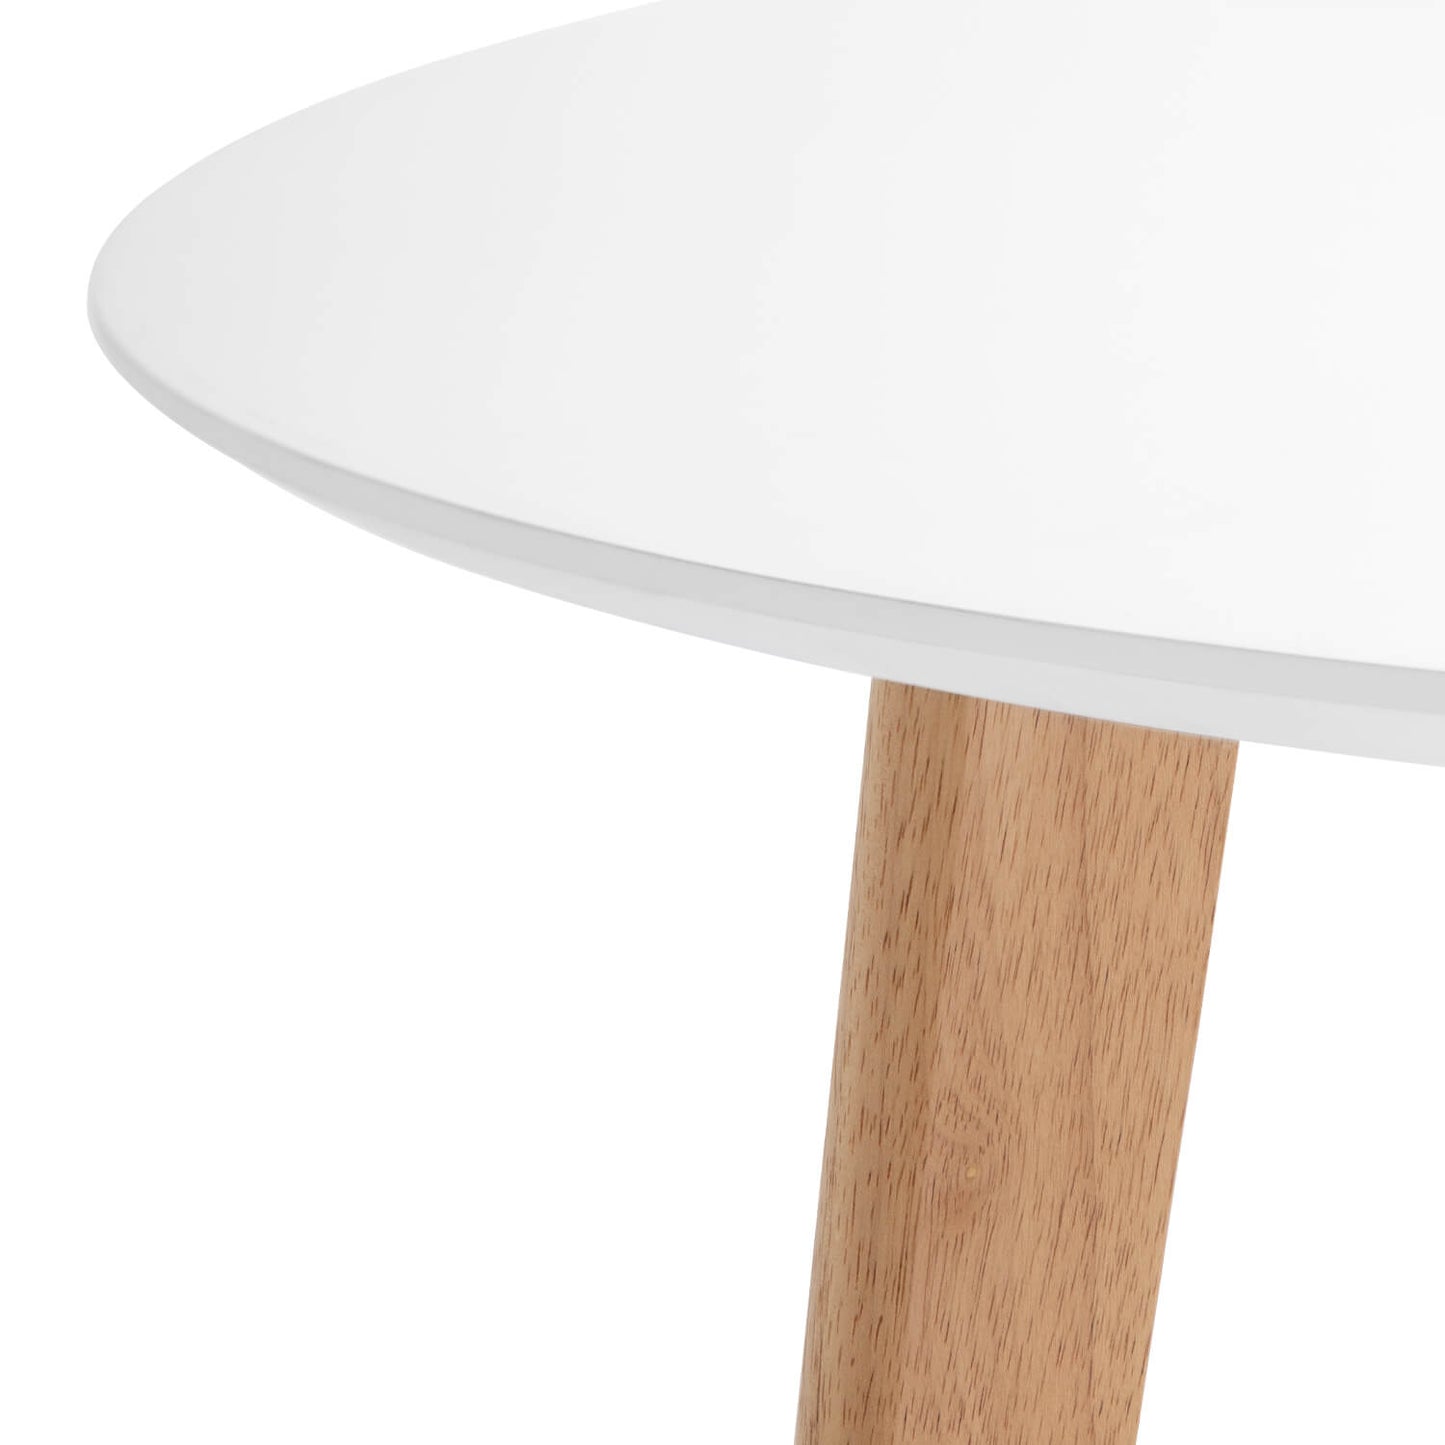 Monna dining table